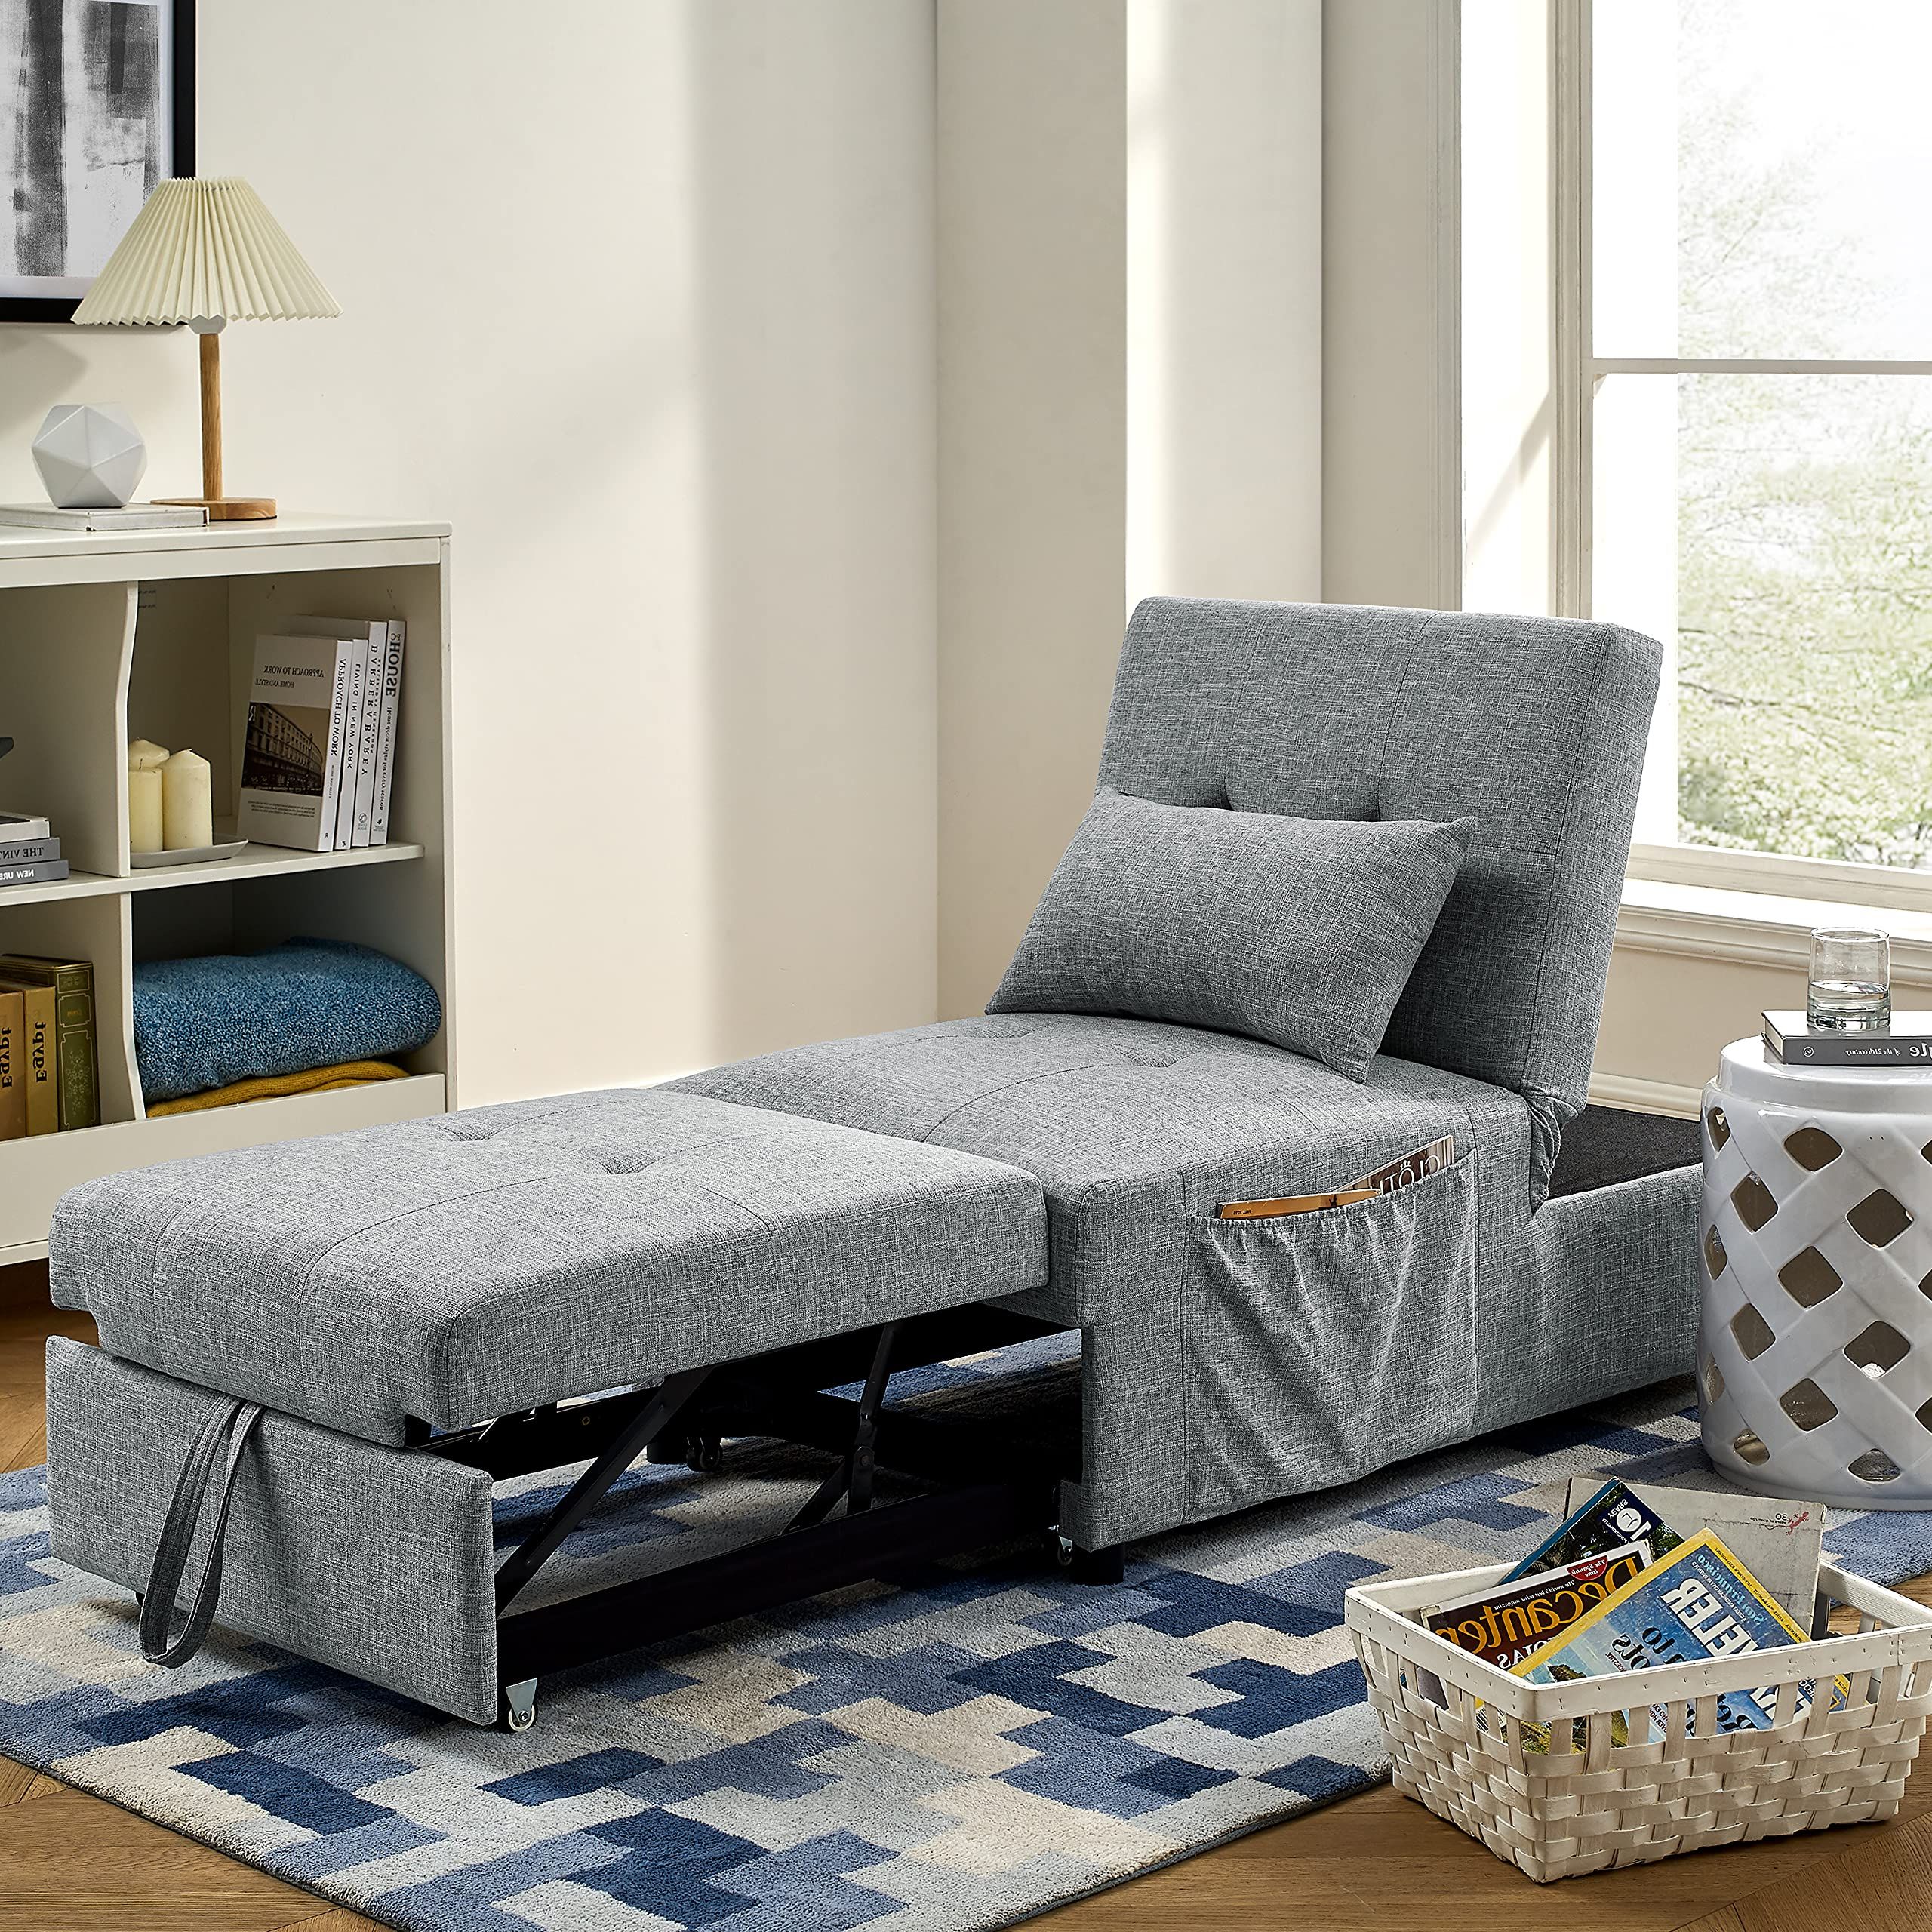 Famous 4 In 1 Convertible Sleeper Chair Beds Intended For 4 In 1 Convertible Sofa Bed, Folding Ottoman Sleeper Chair Bed Single (Photo 1 of 15)